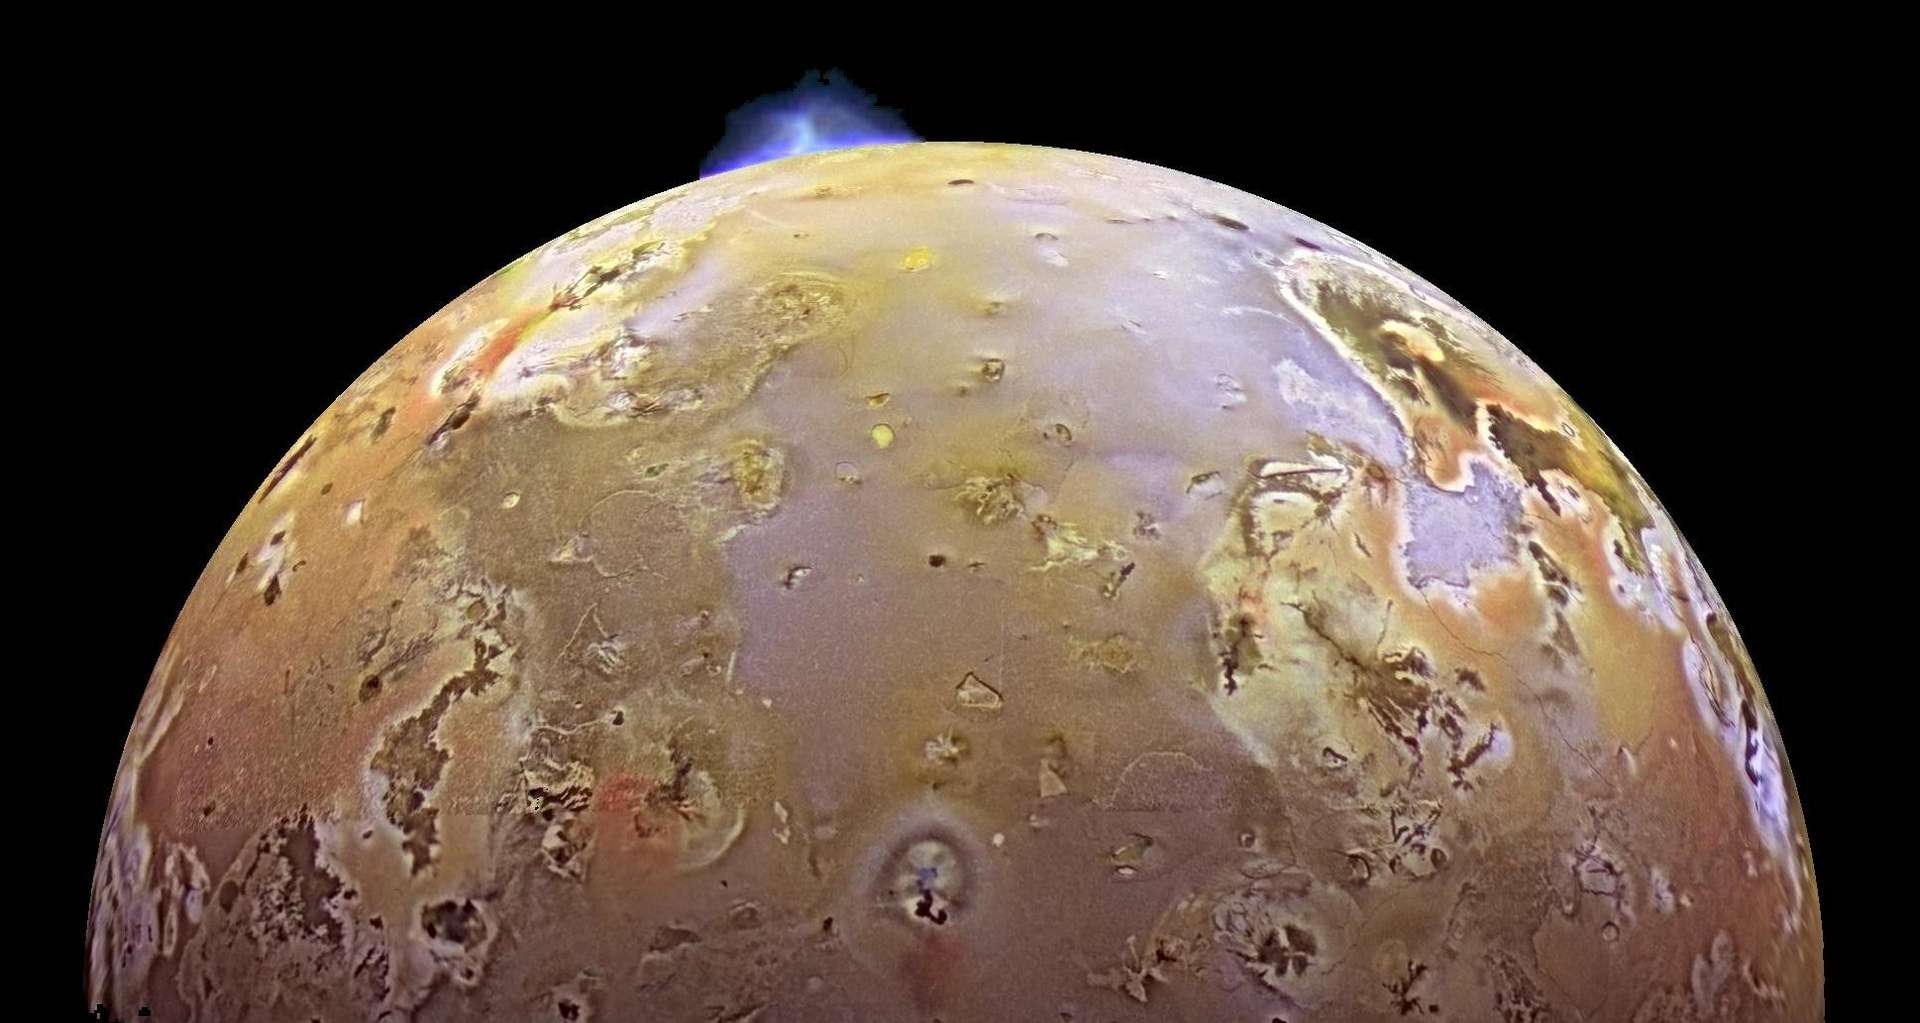 Violent volcanic eruption observed on Io, the most volcanic body in the solar system